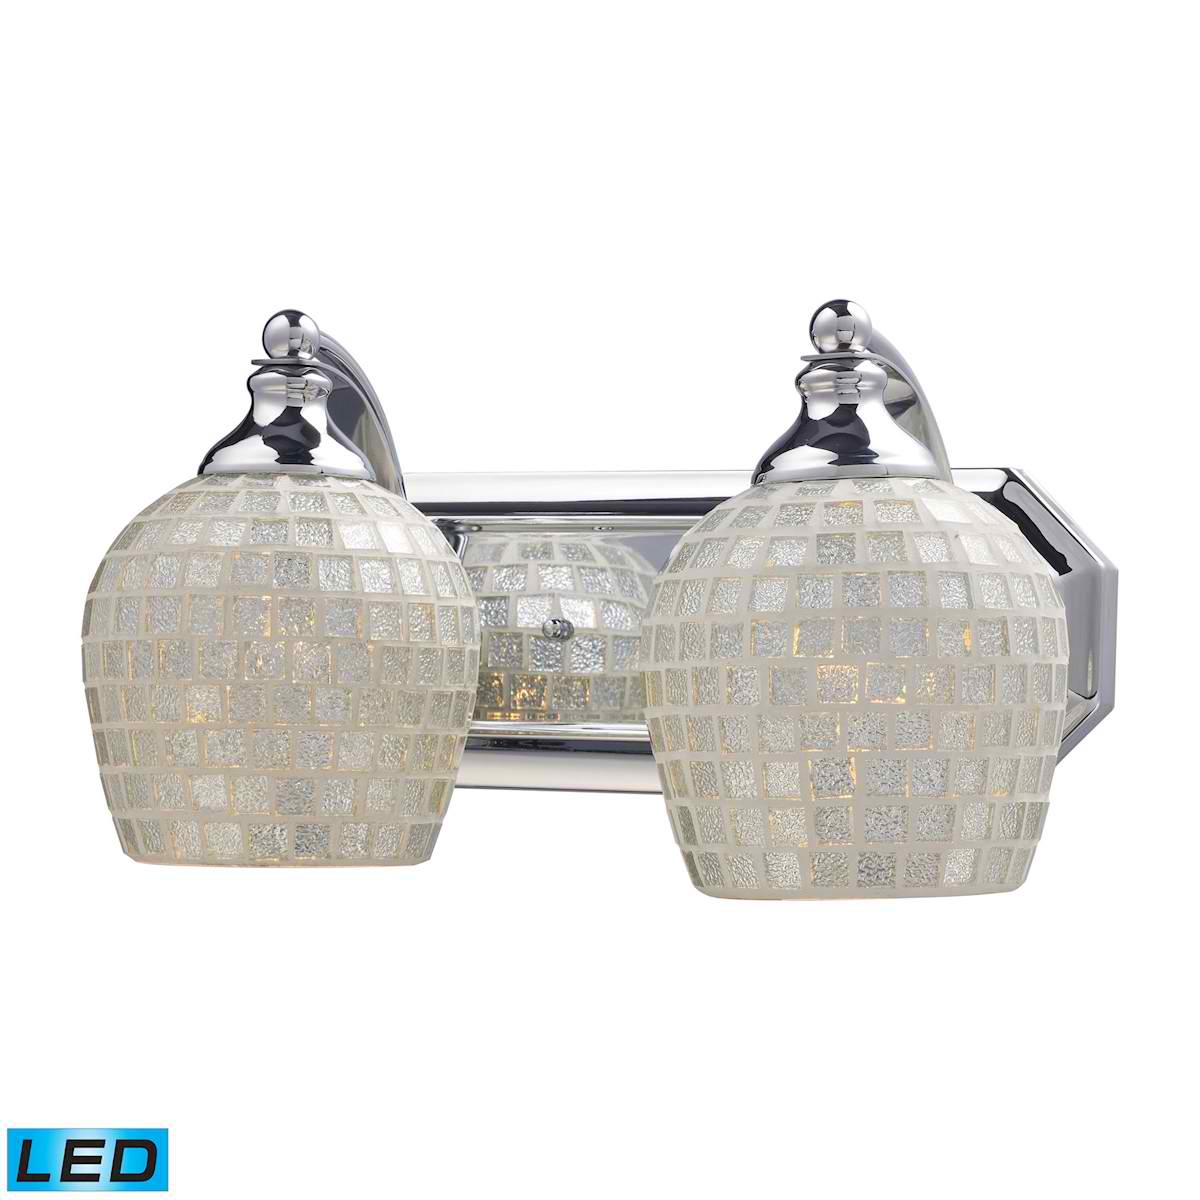 2 Light Vanity in Polished Chrome and Silver Mosaic Glass - LED, 800 Lumens (1600 Lumens Total) With Full Scale